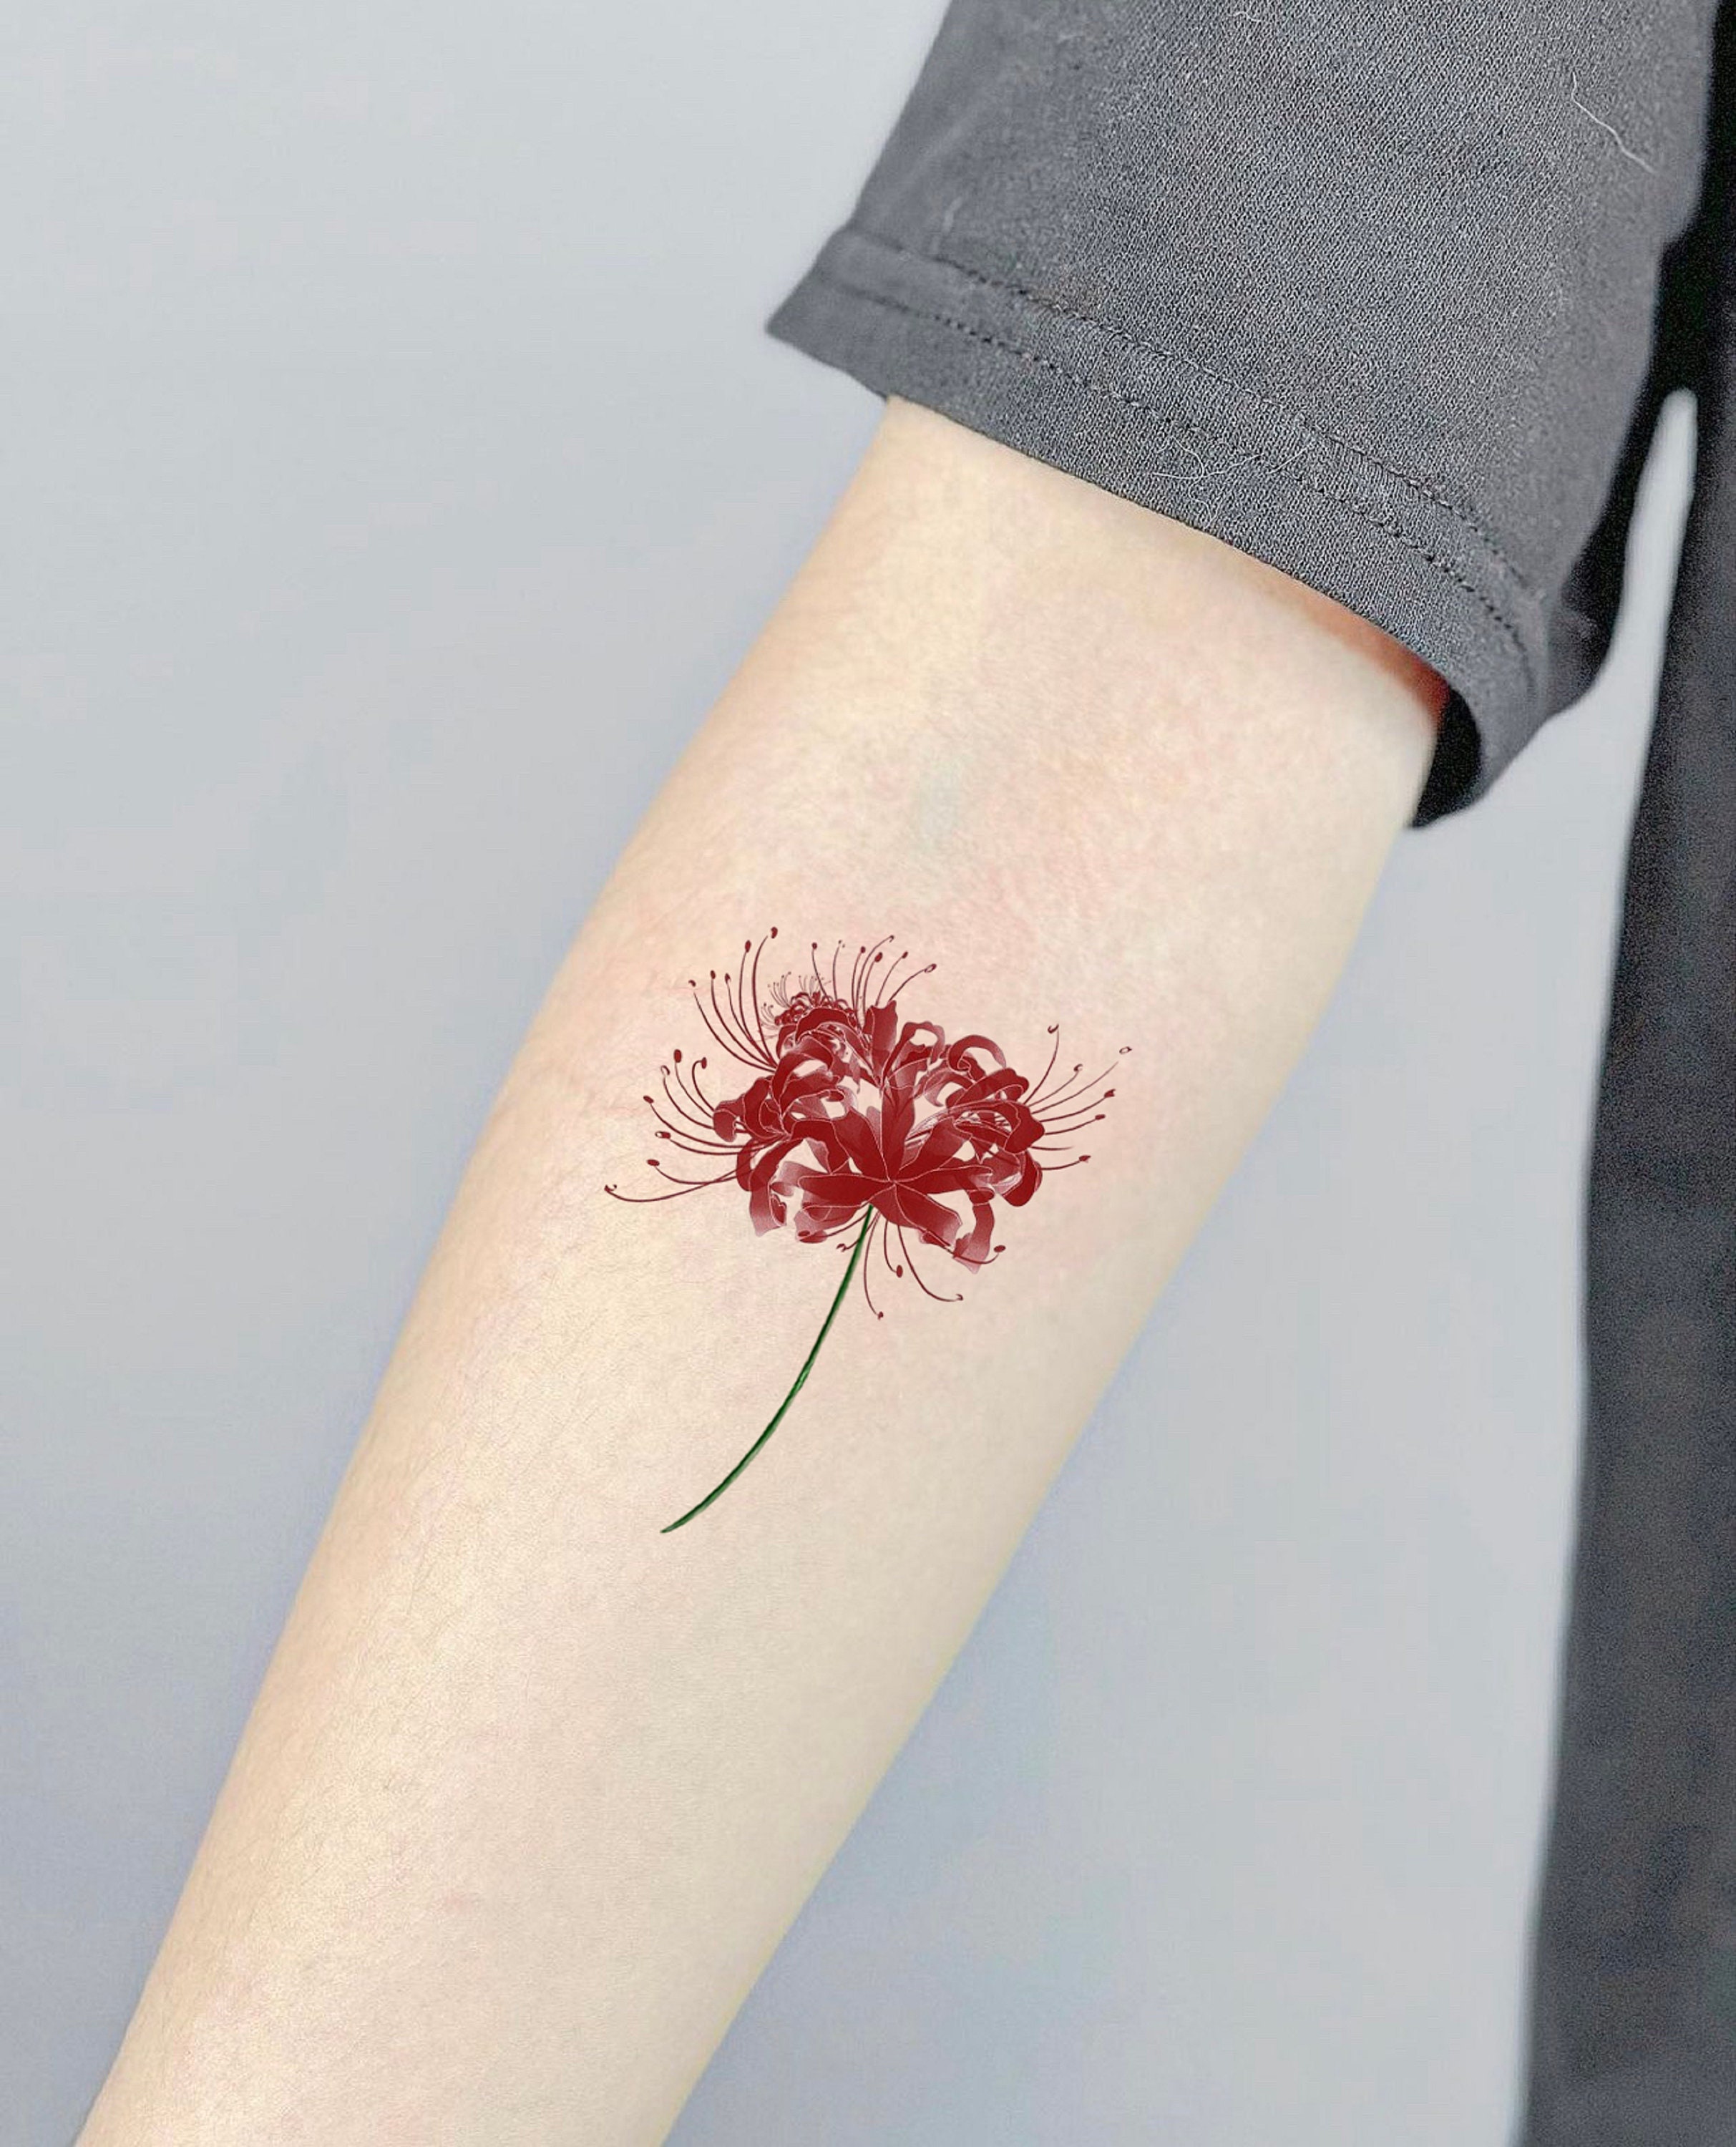 20 Beautiful Spider Lily Flower Tattoo Design Ideas For Females   EntertainmentMesh